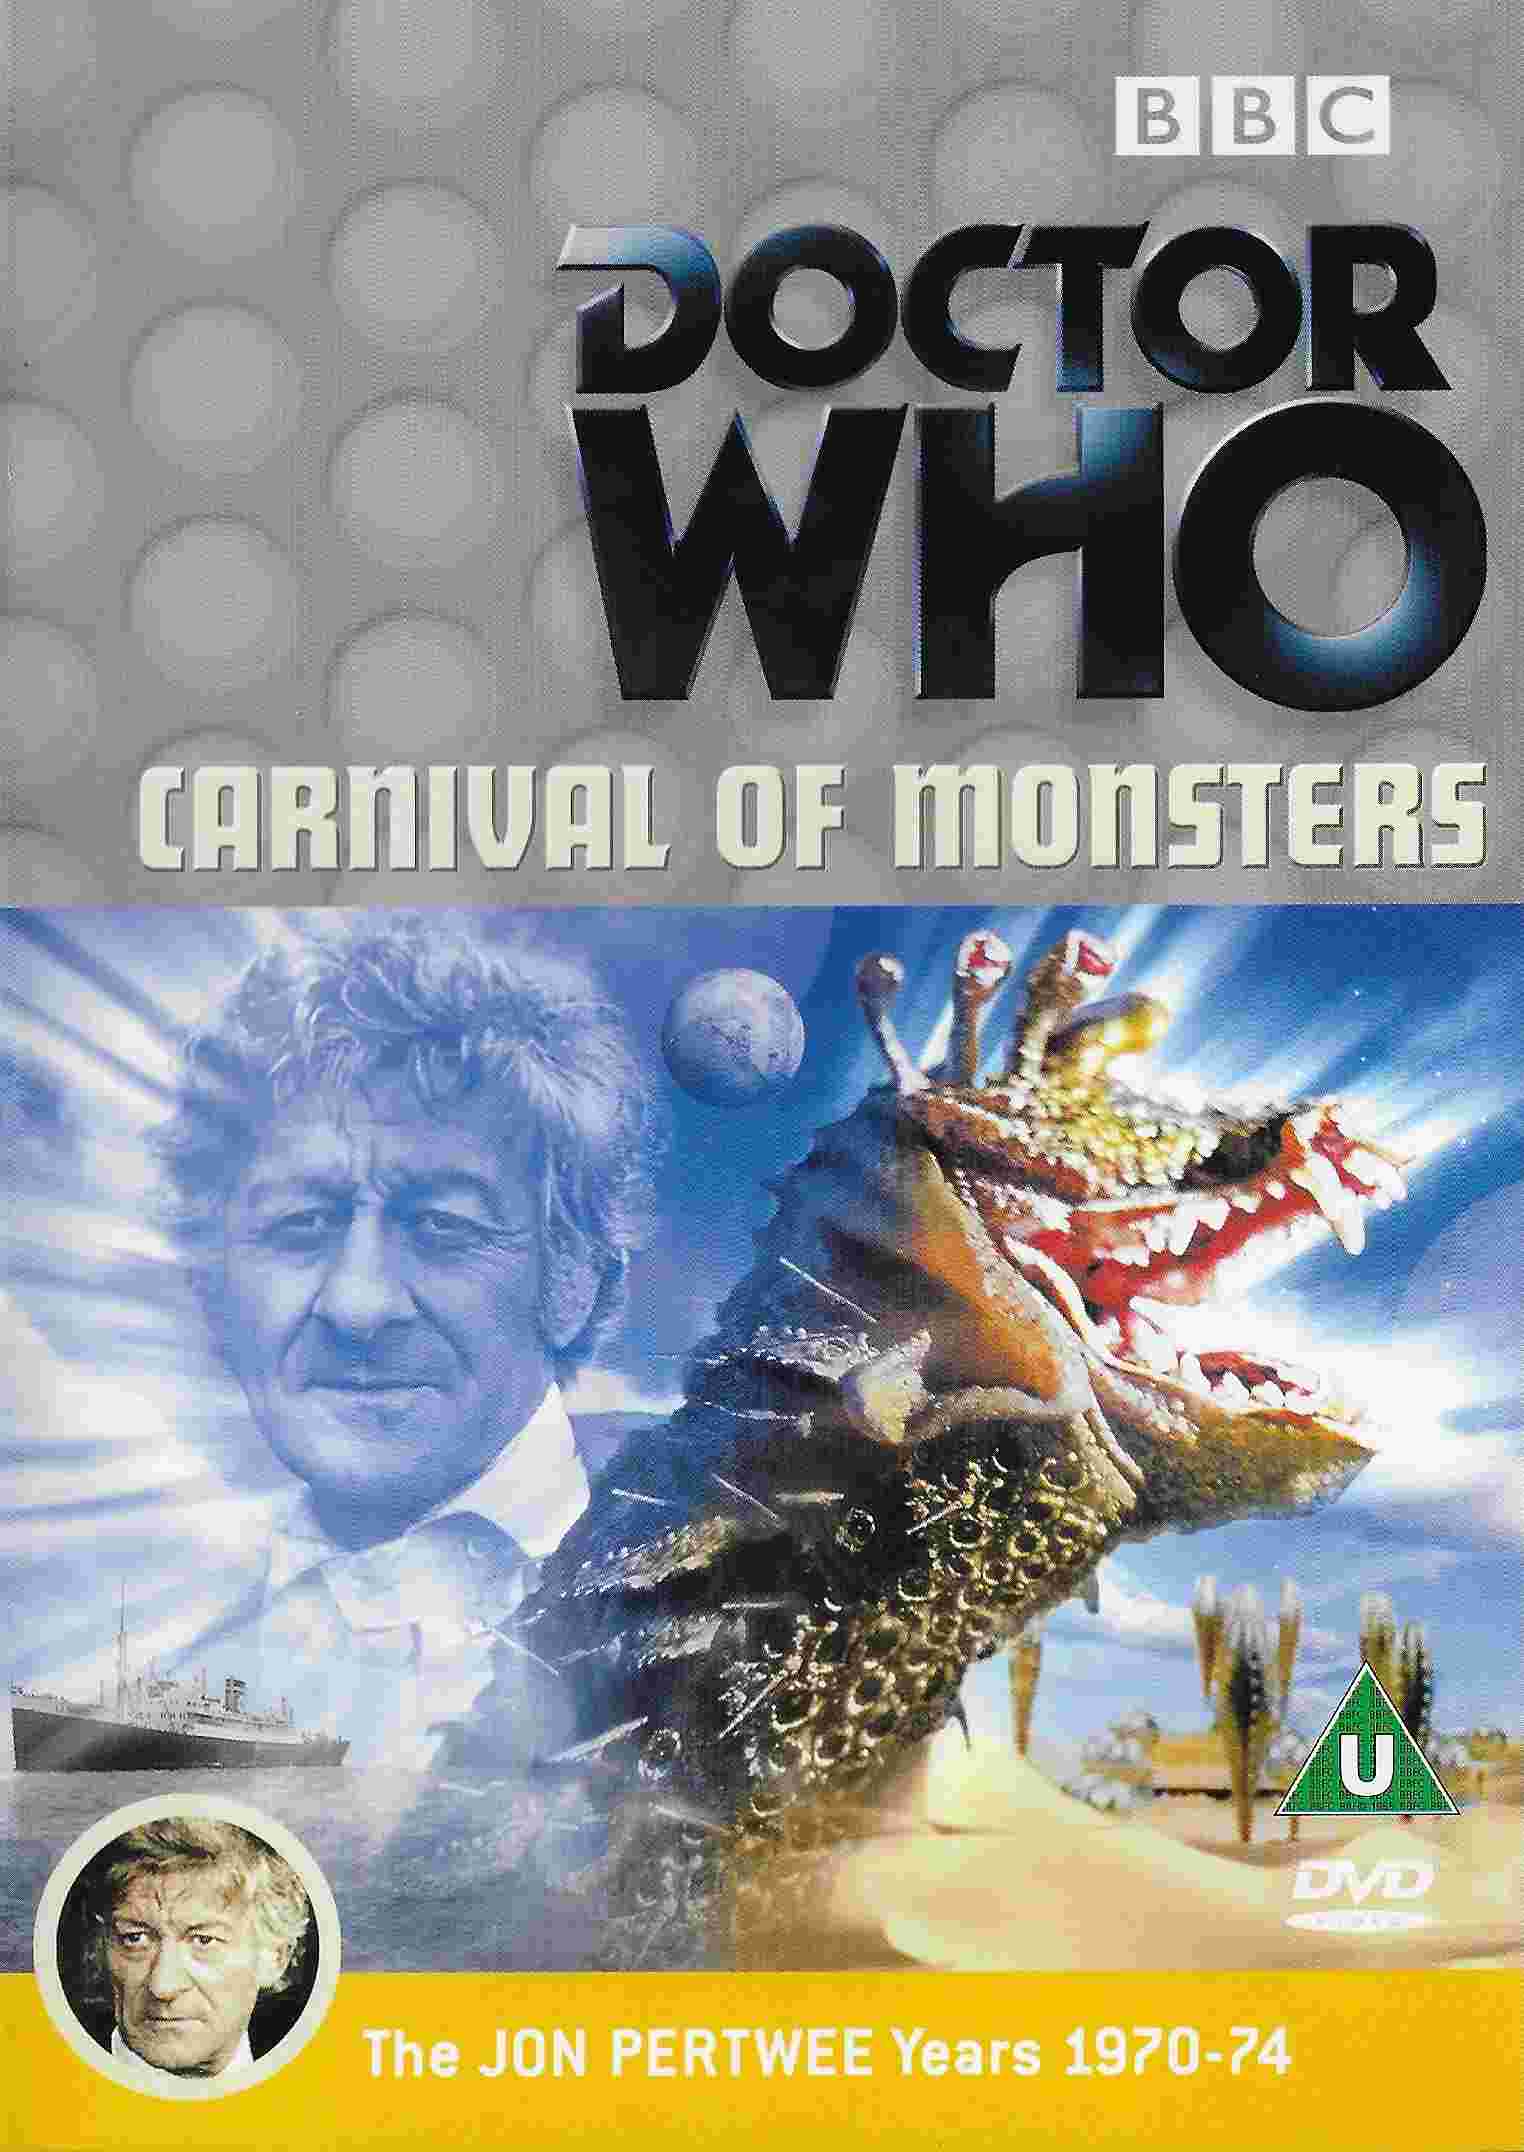 Picture of BBCDVD 1098 Doctor Who - Carnival of monsters by artist Robert Holmes from the BBC dvds - Records and Tapes library